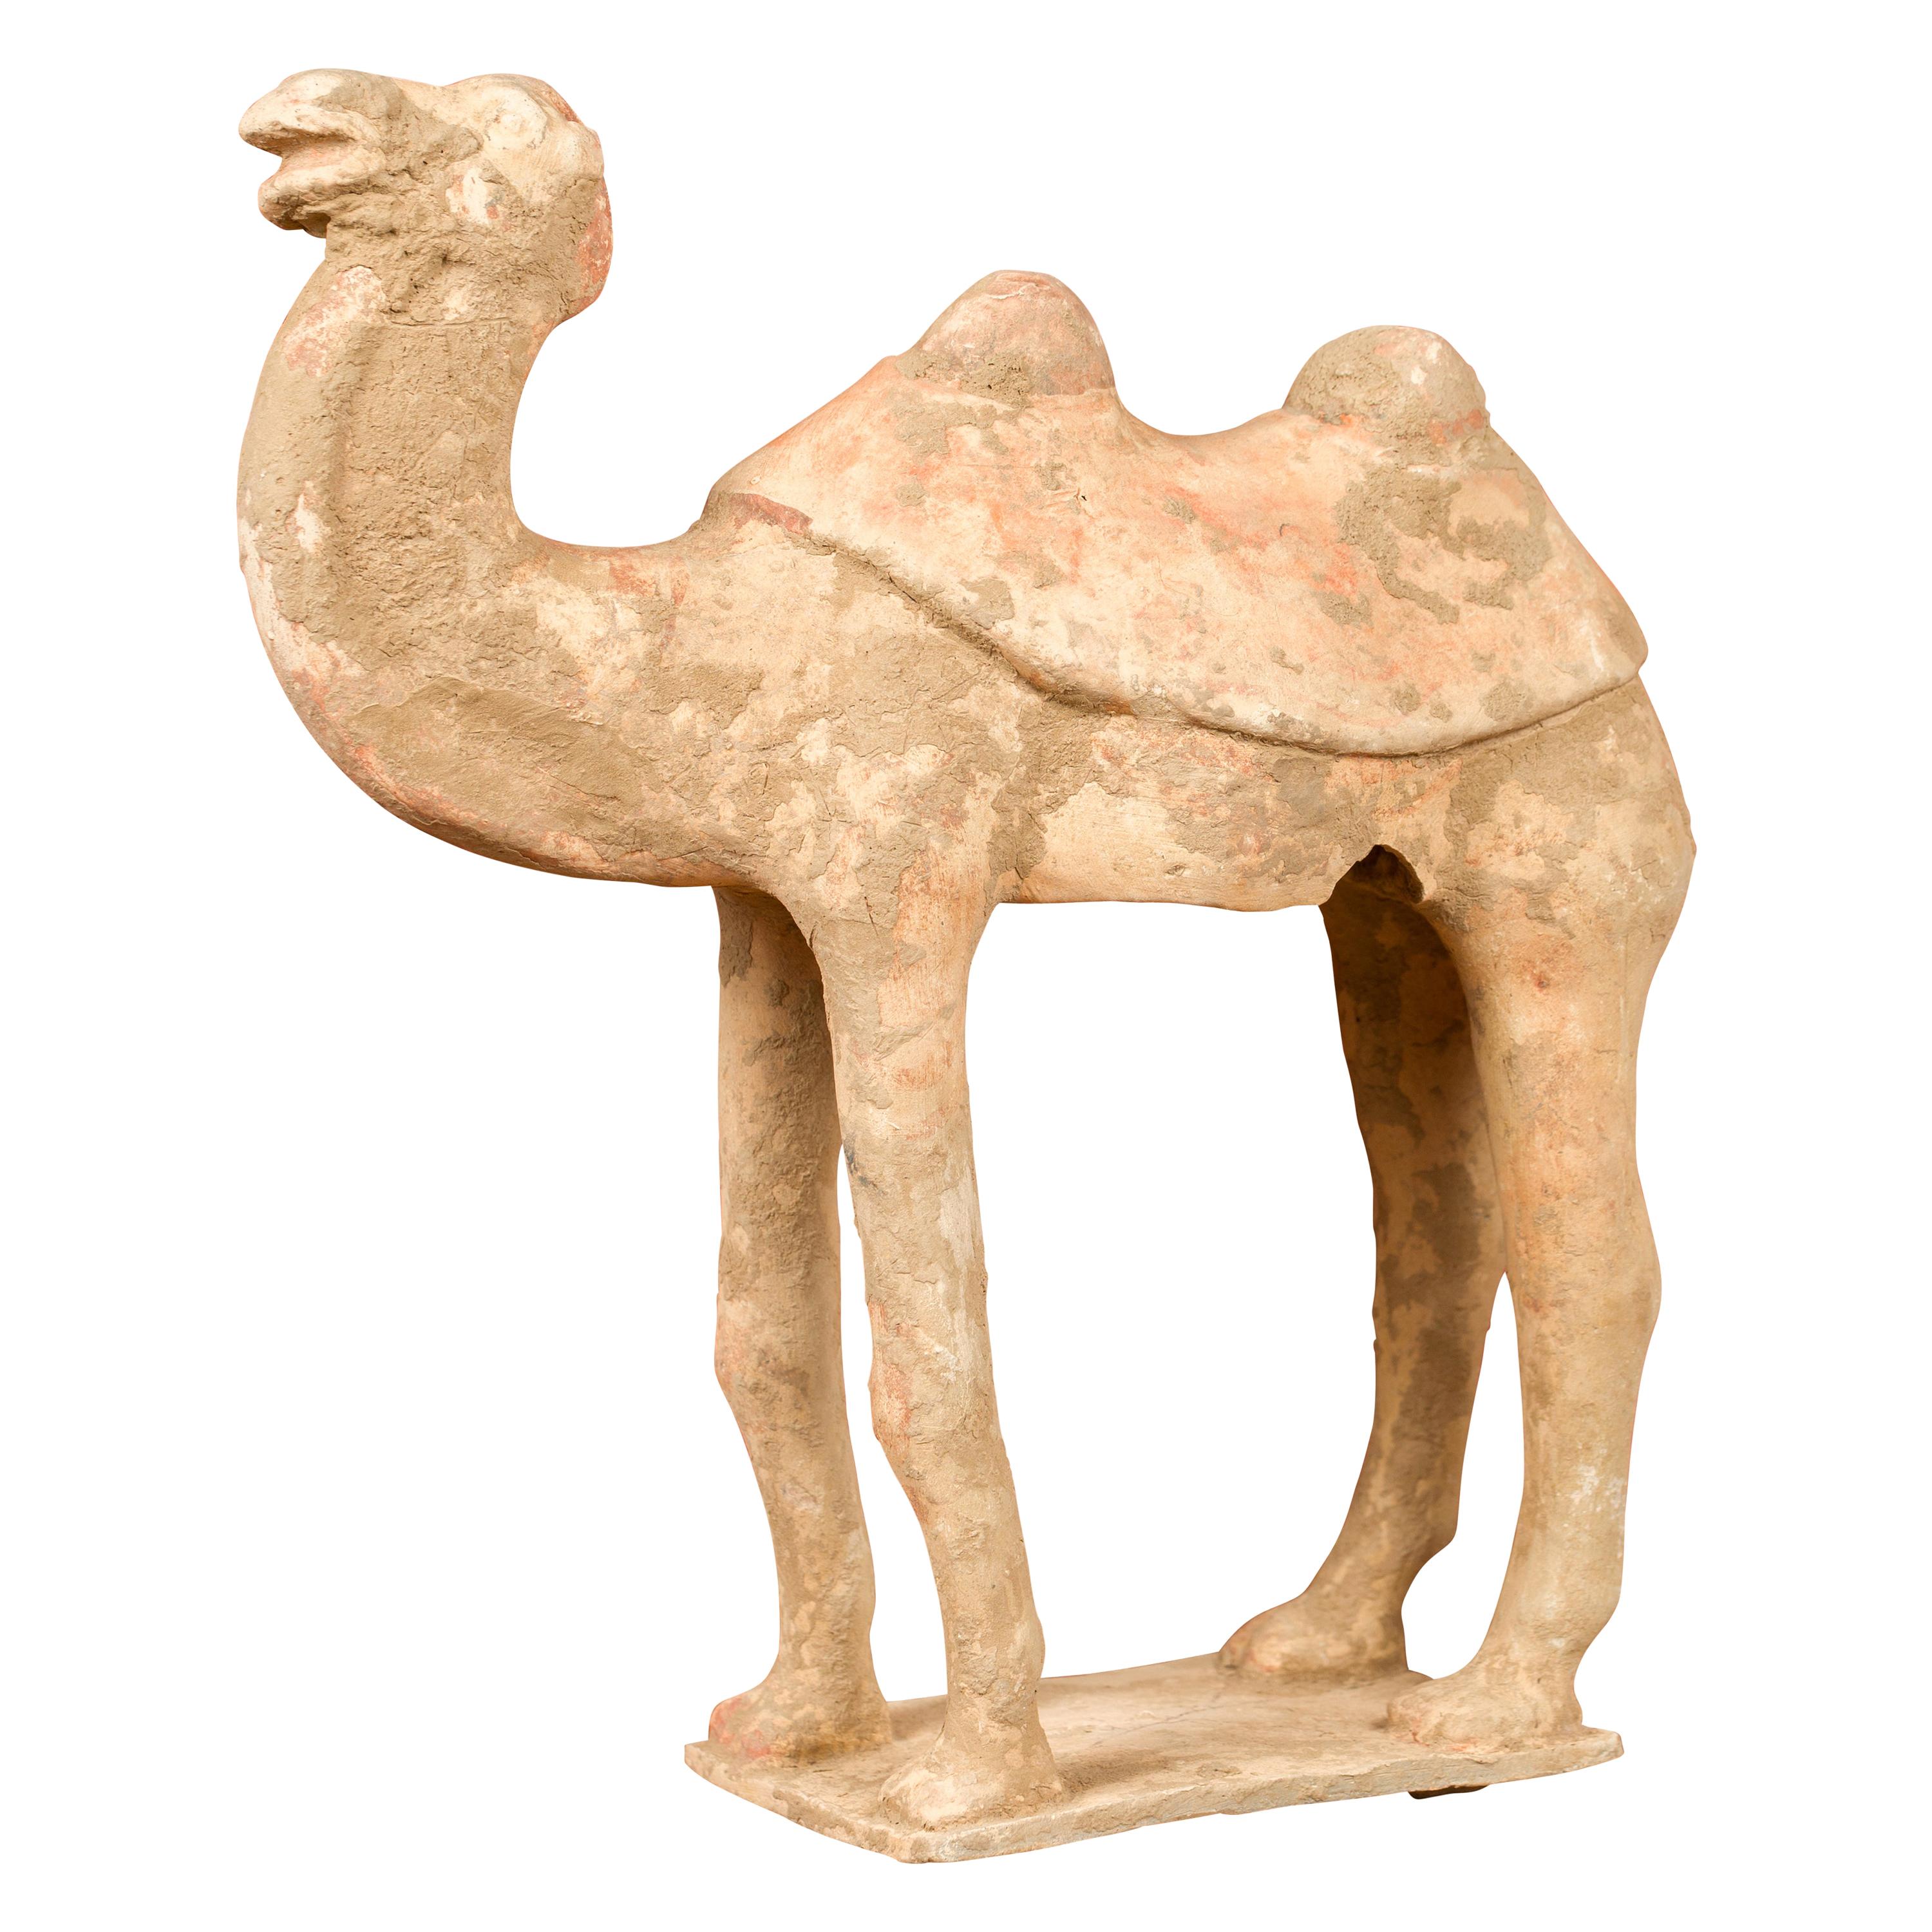 Chinese Han Dynasty 202 BC-200 AD Mingqi Camel with Original Orange Paint